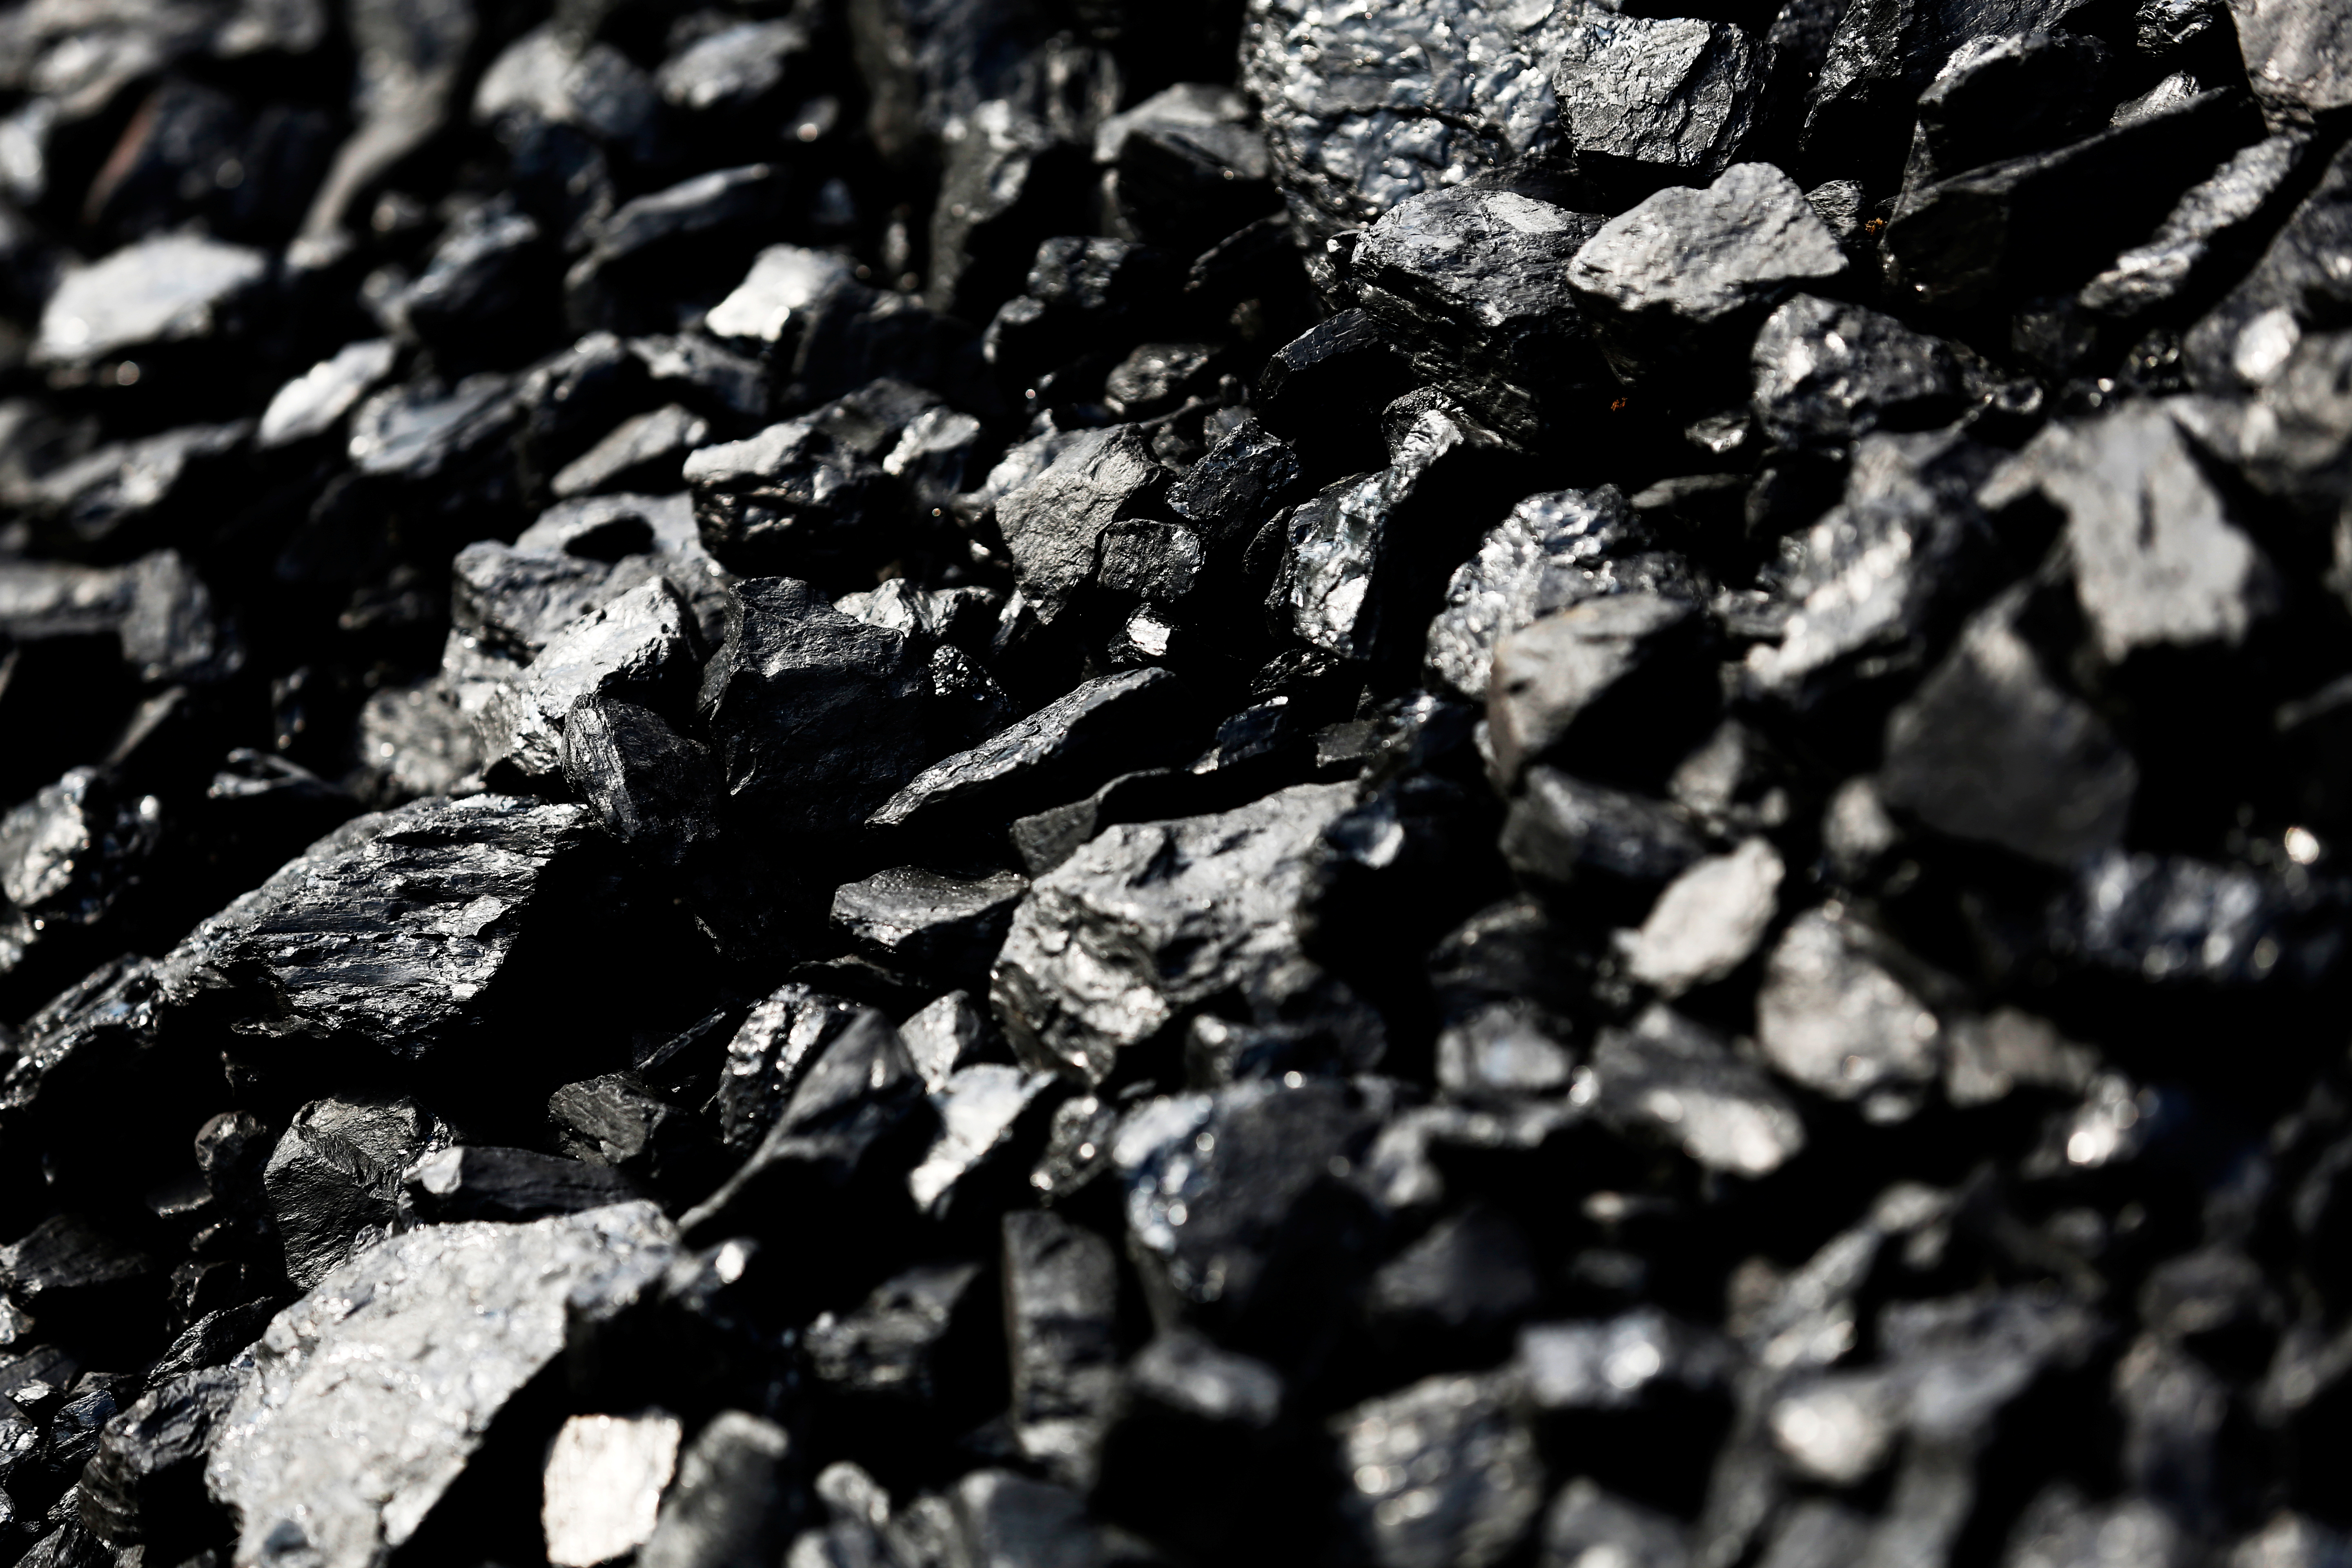 Recommendations for reforms in coal mining space